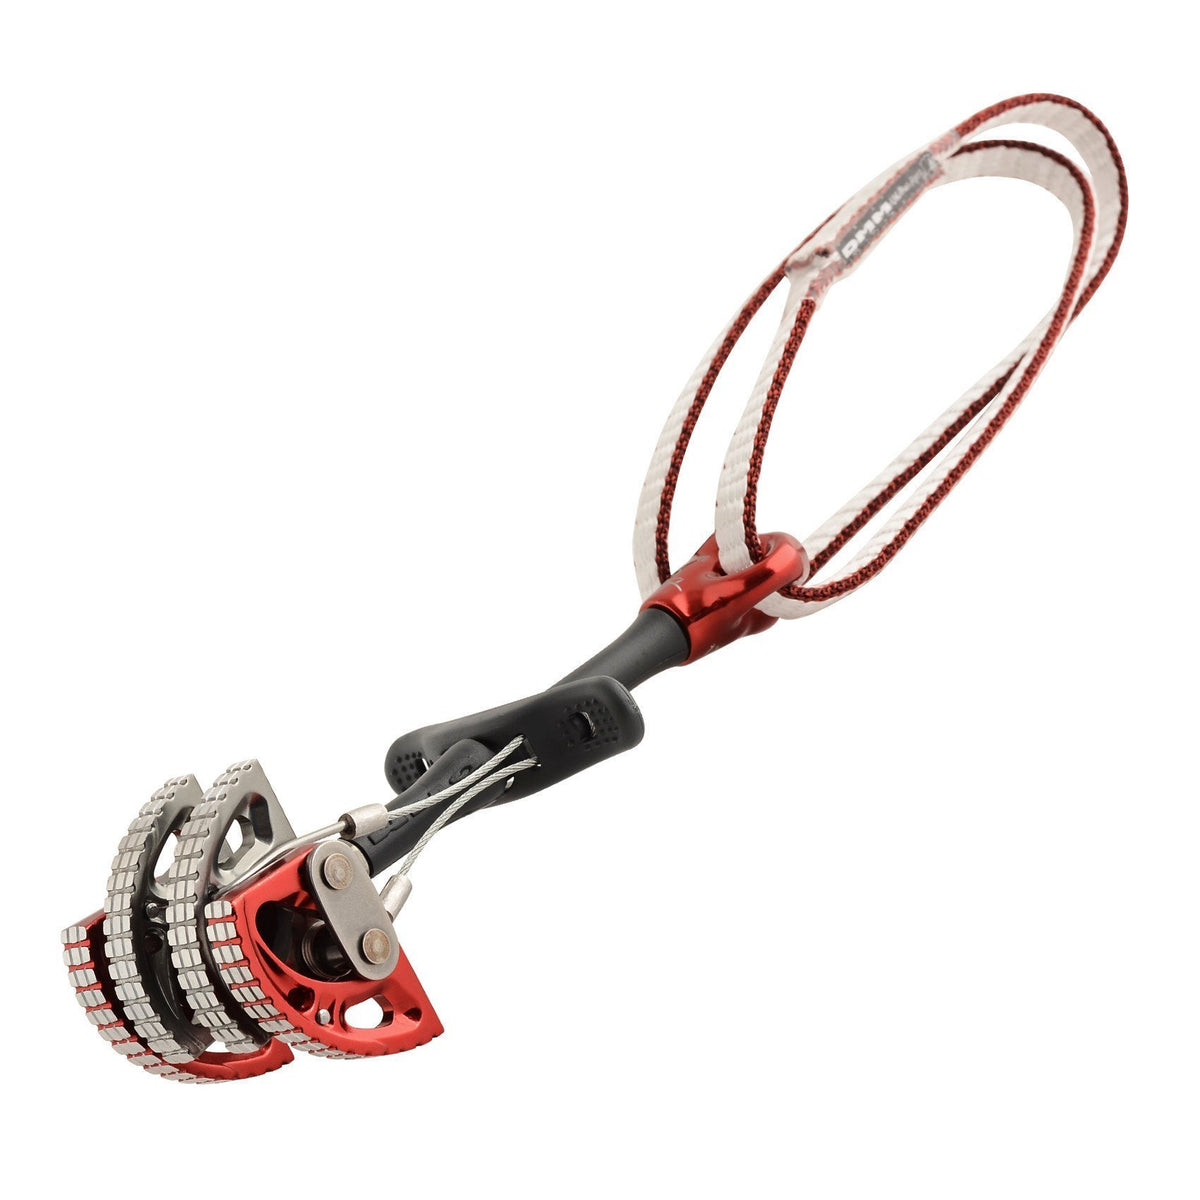 DMM Dragon Cam, Size 3 in red colour